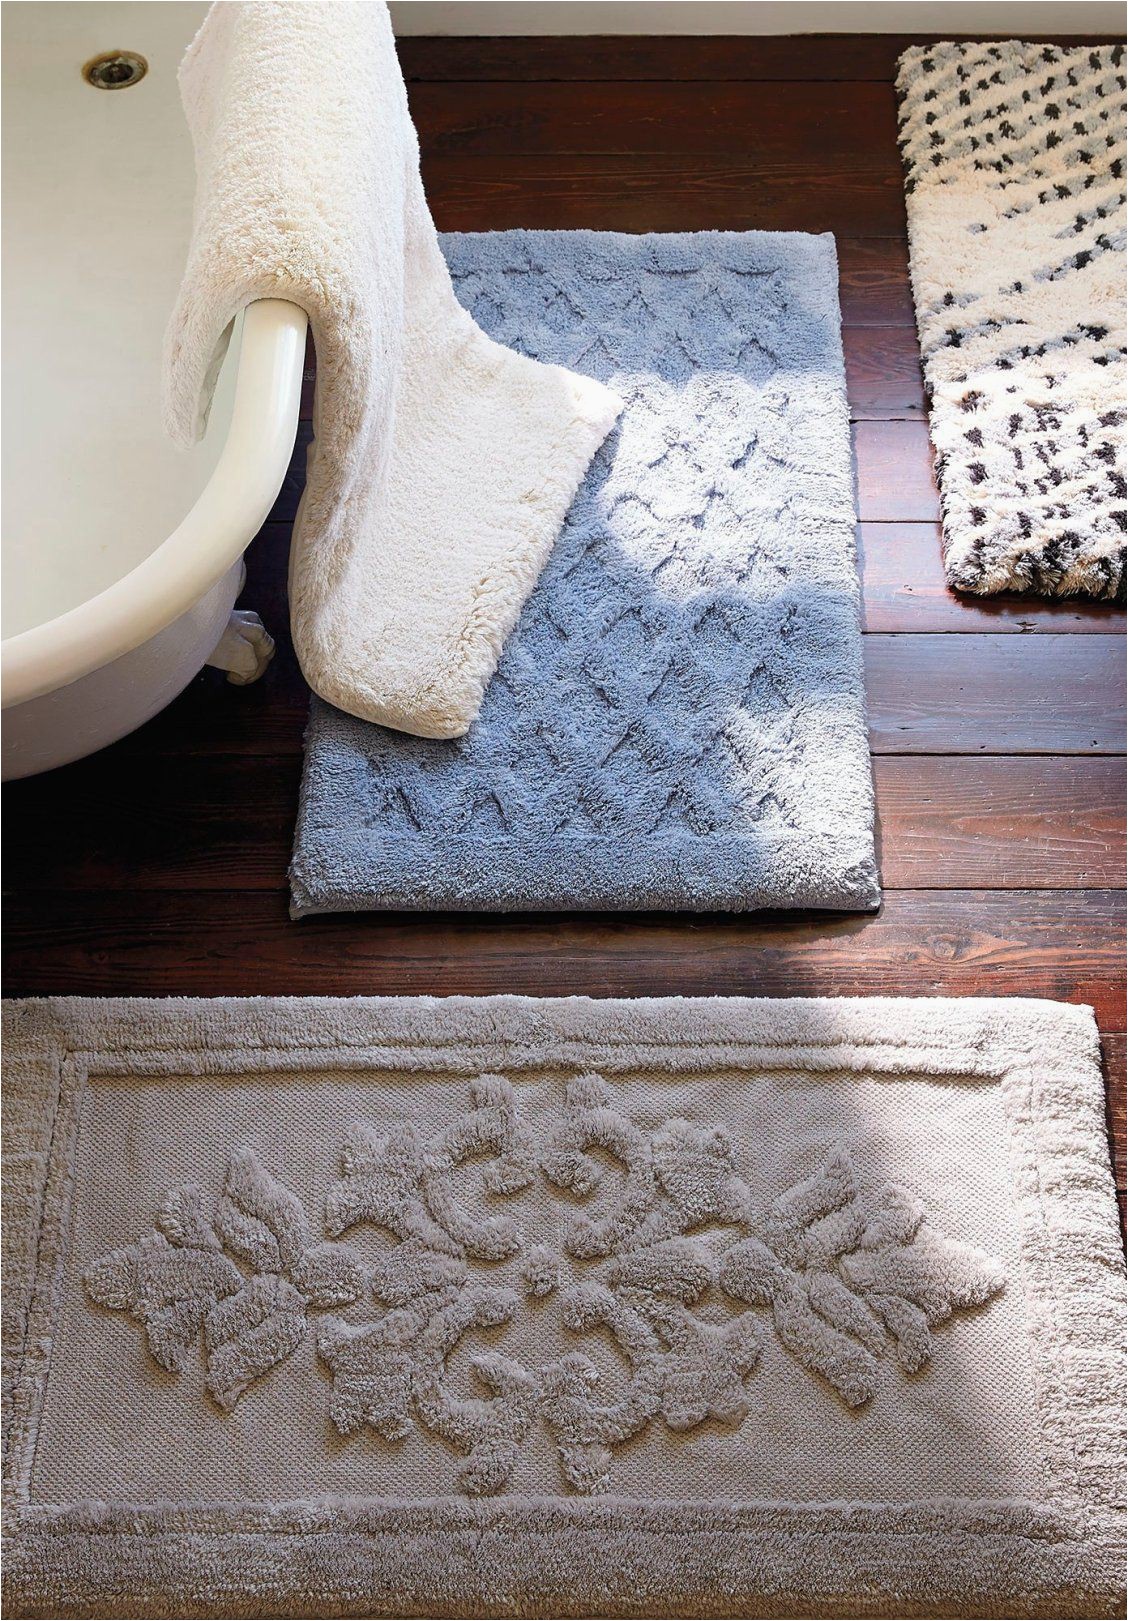 Removable Memory Foam Bath Rug Everly S Overtufted Damask Design and Piqué Background Lends